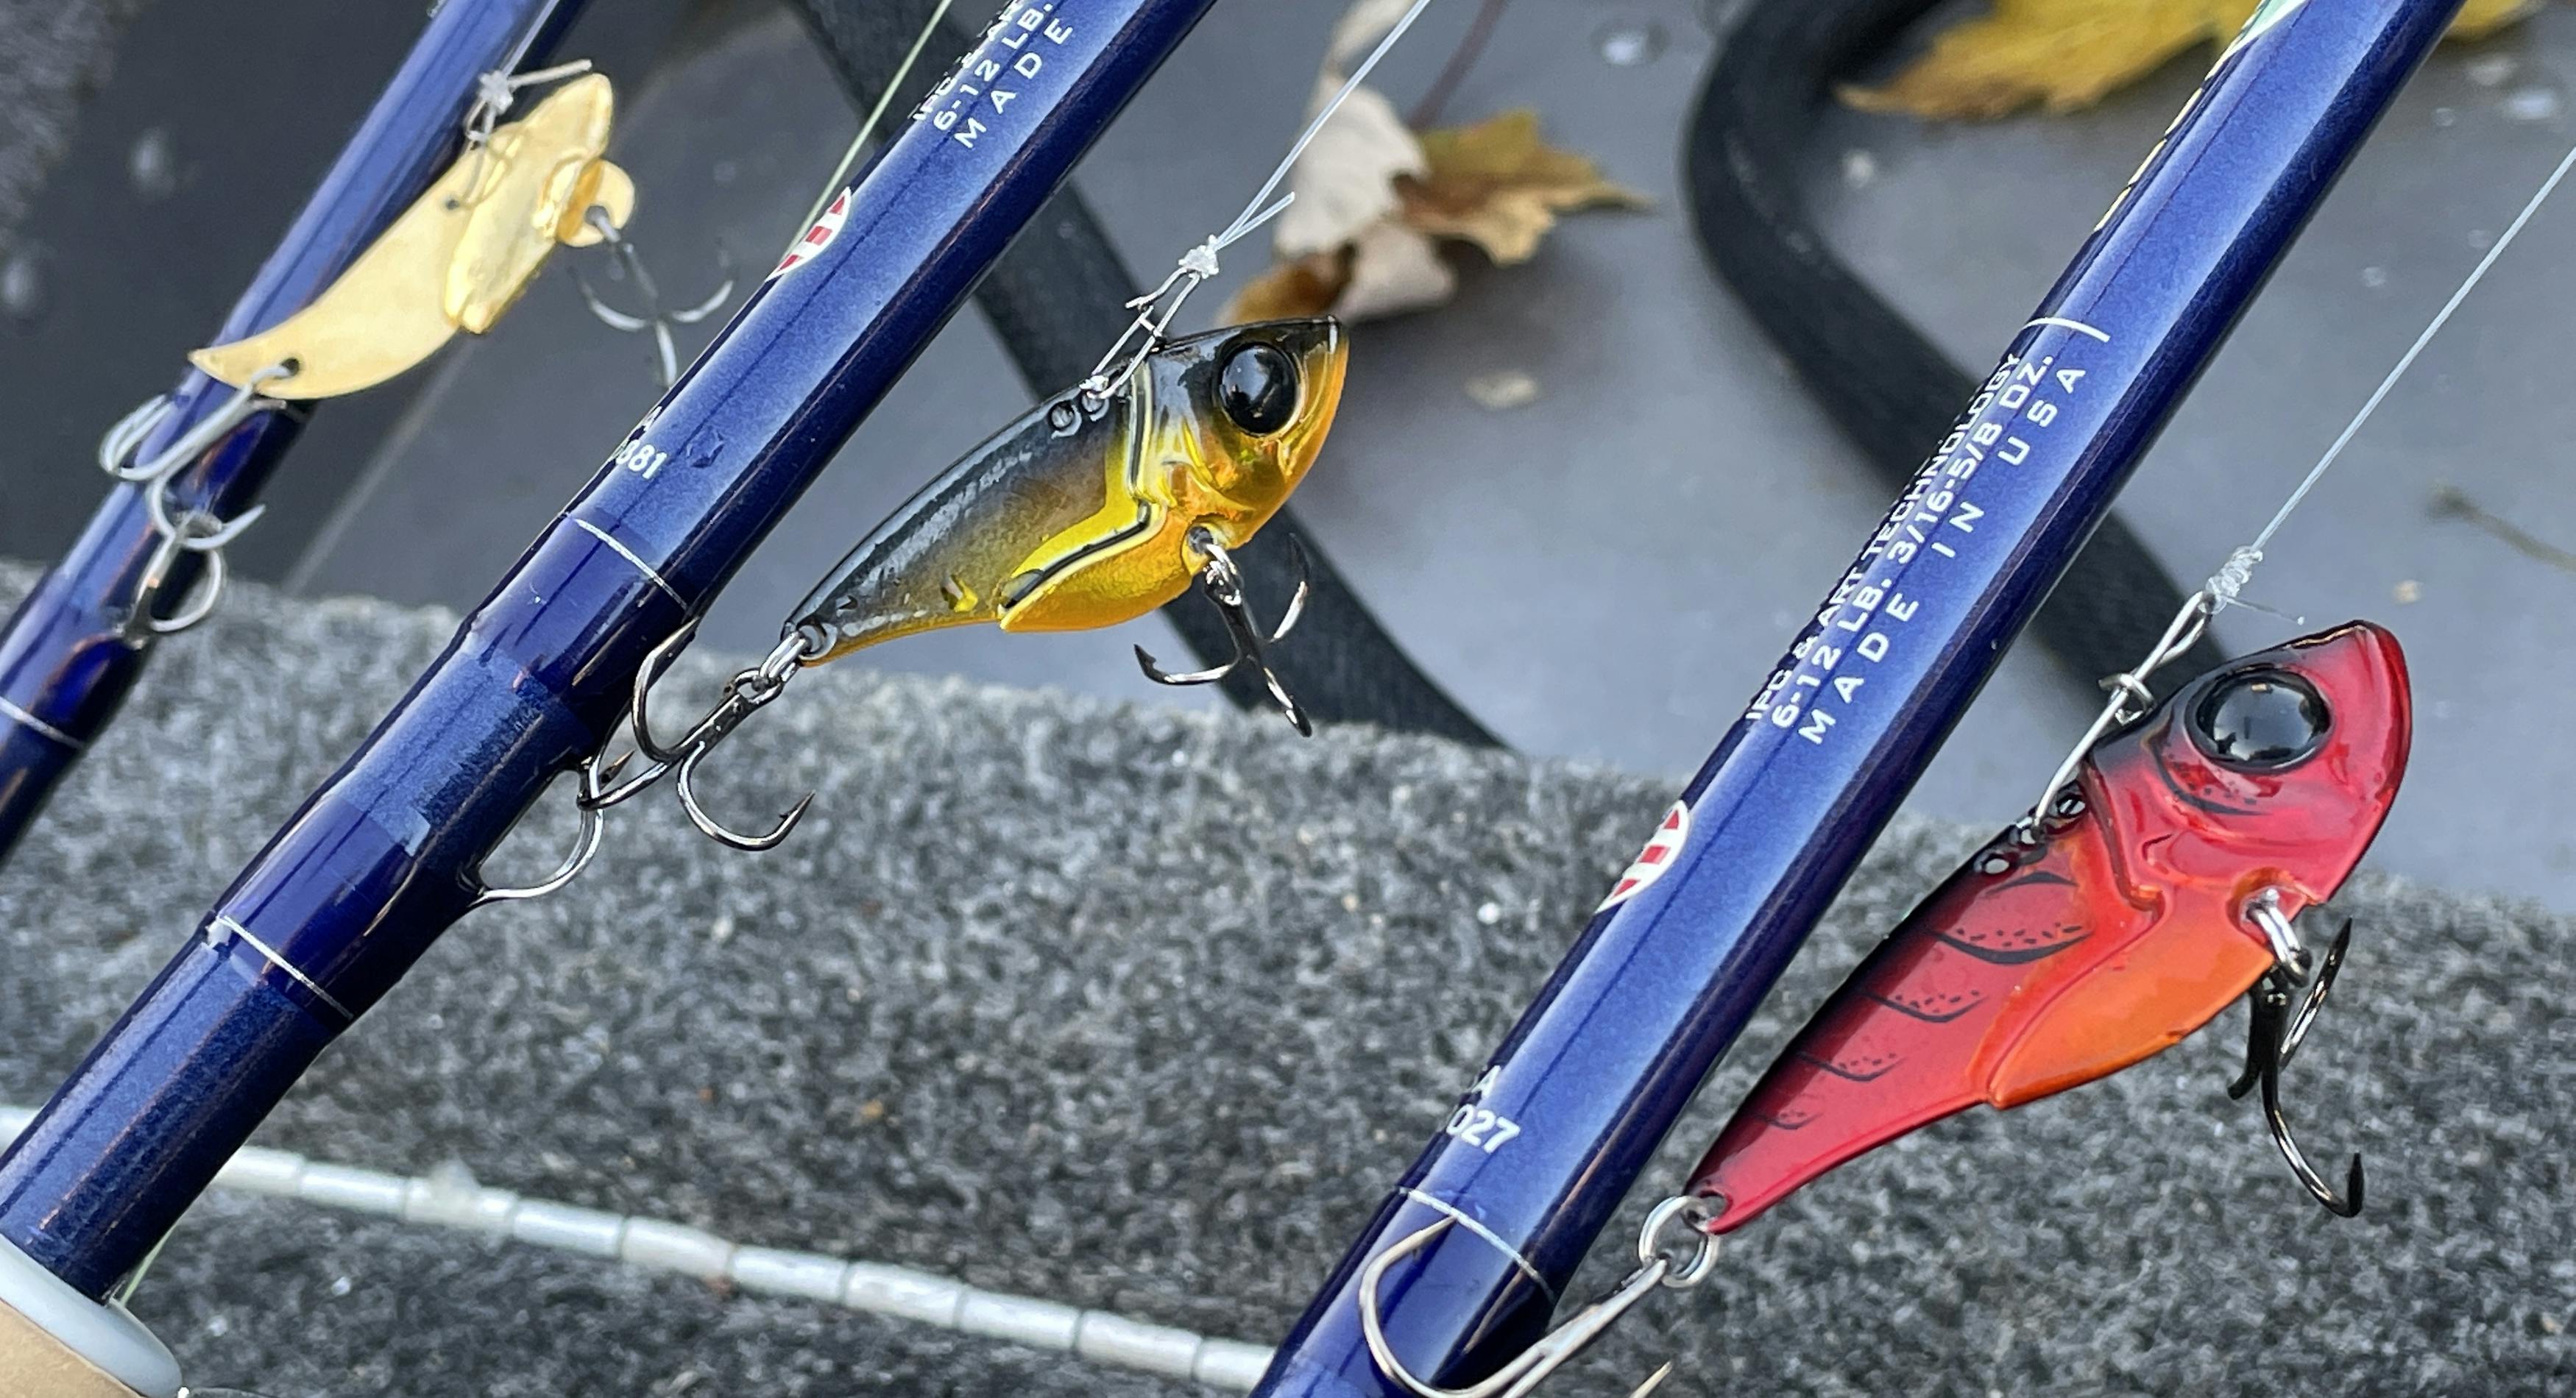 Blade baits rigged for fall fishing